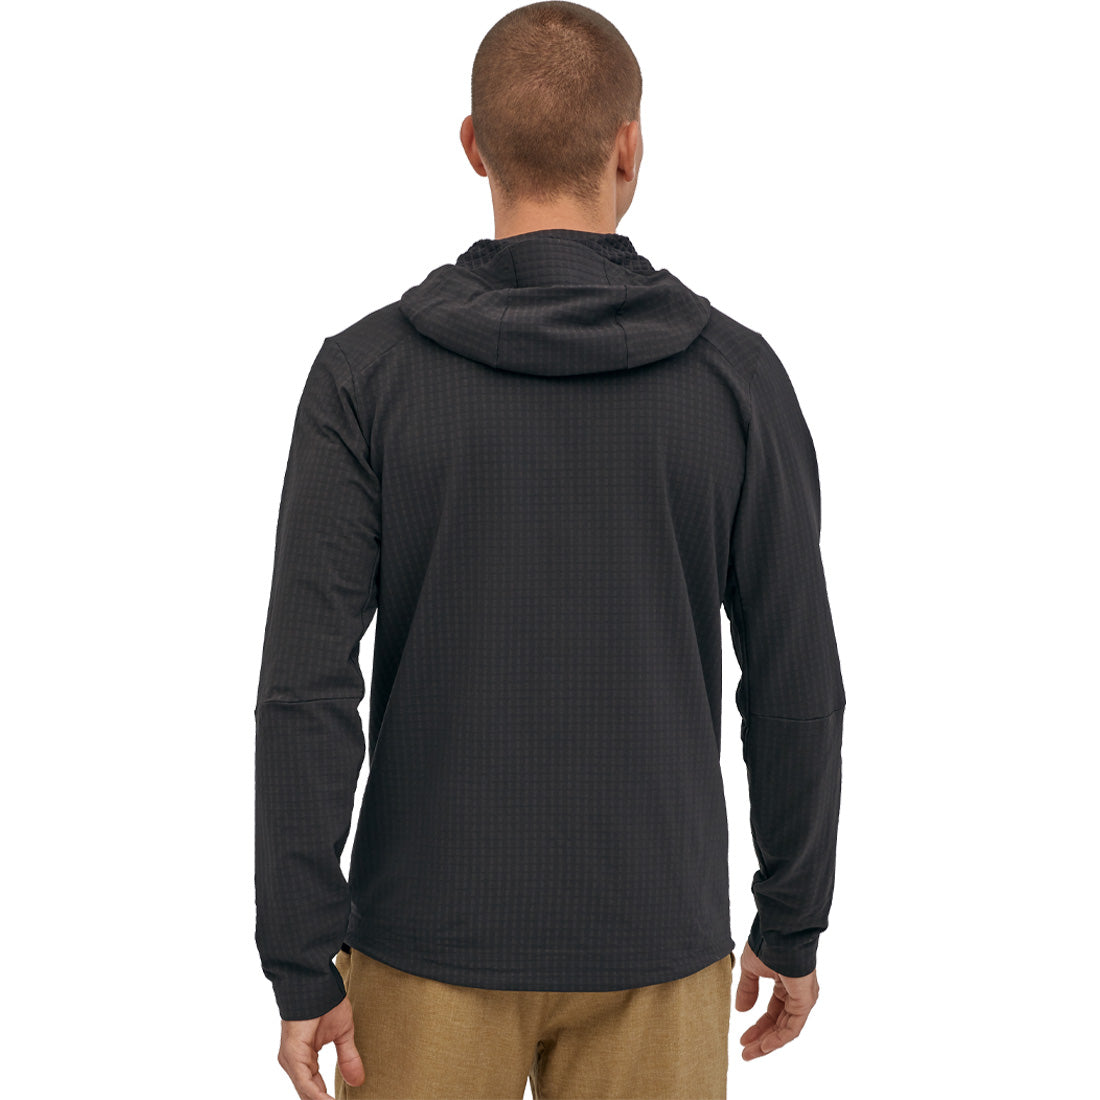 Patagonia R1 TechFace Hoody (Discontinued) - Men's